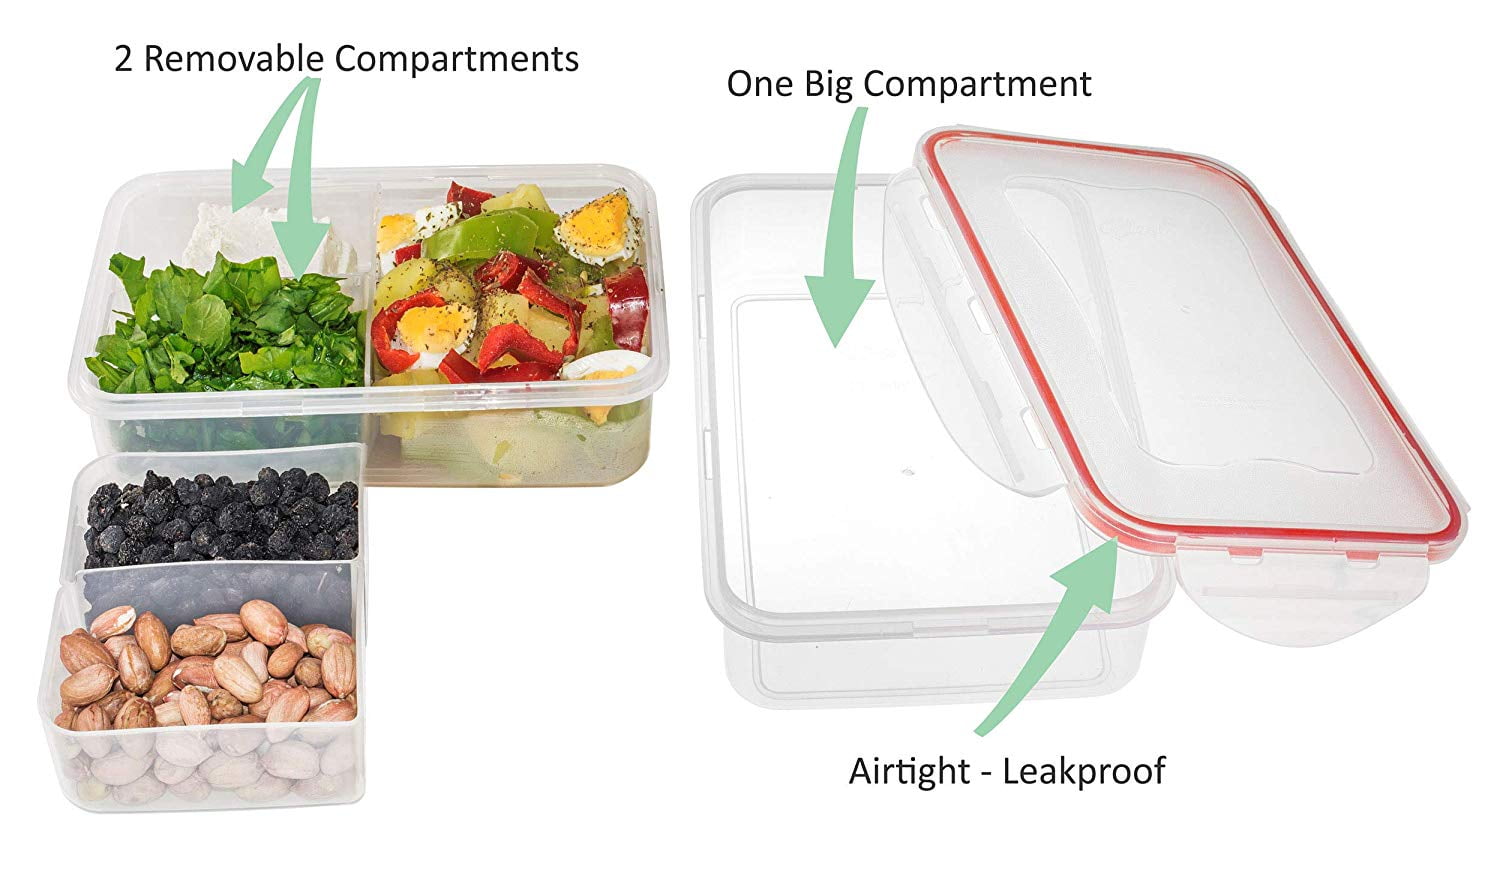  Bento Lunch Box 2pcs set 40,5 oz- Meal Prep Containers  Microwavable - BPA Free - External Leak Proof - Portion Control Food  Organizer Boxes Dishwasher Compatible Snap Locking Lid: Home & Kitchen